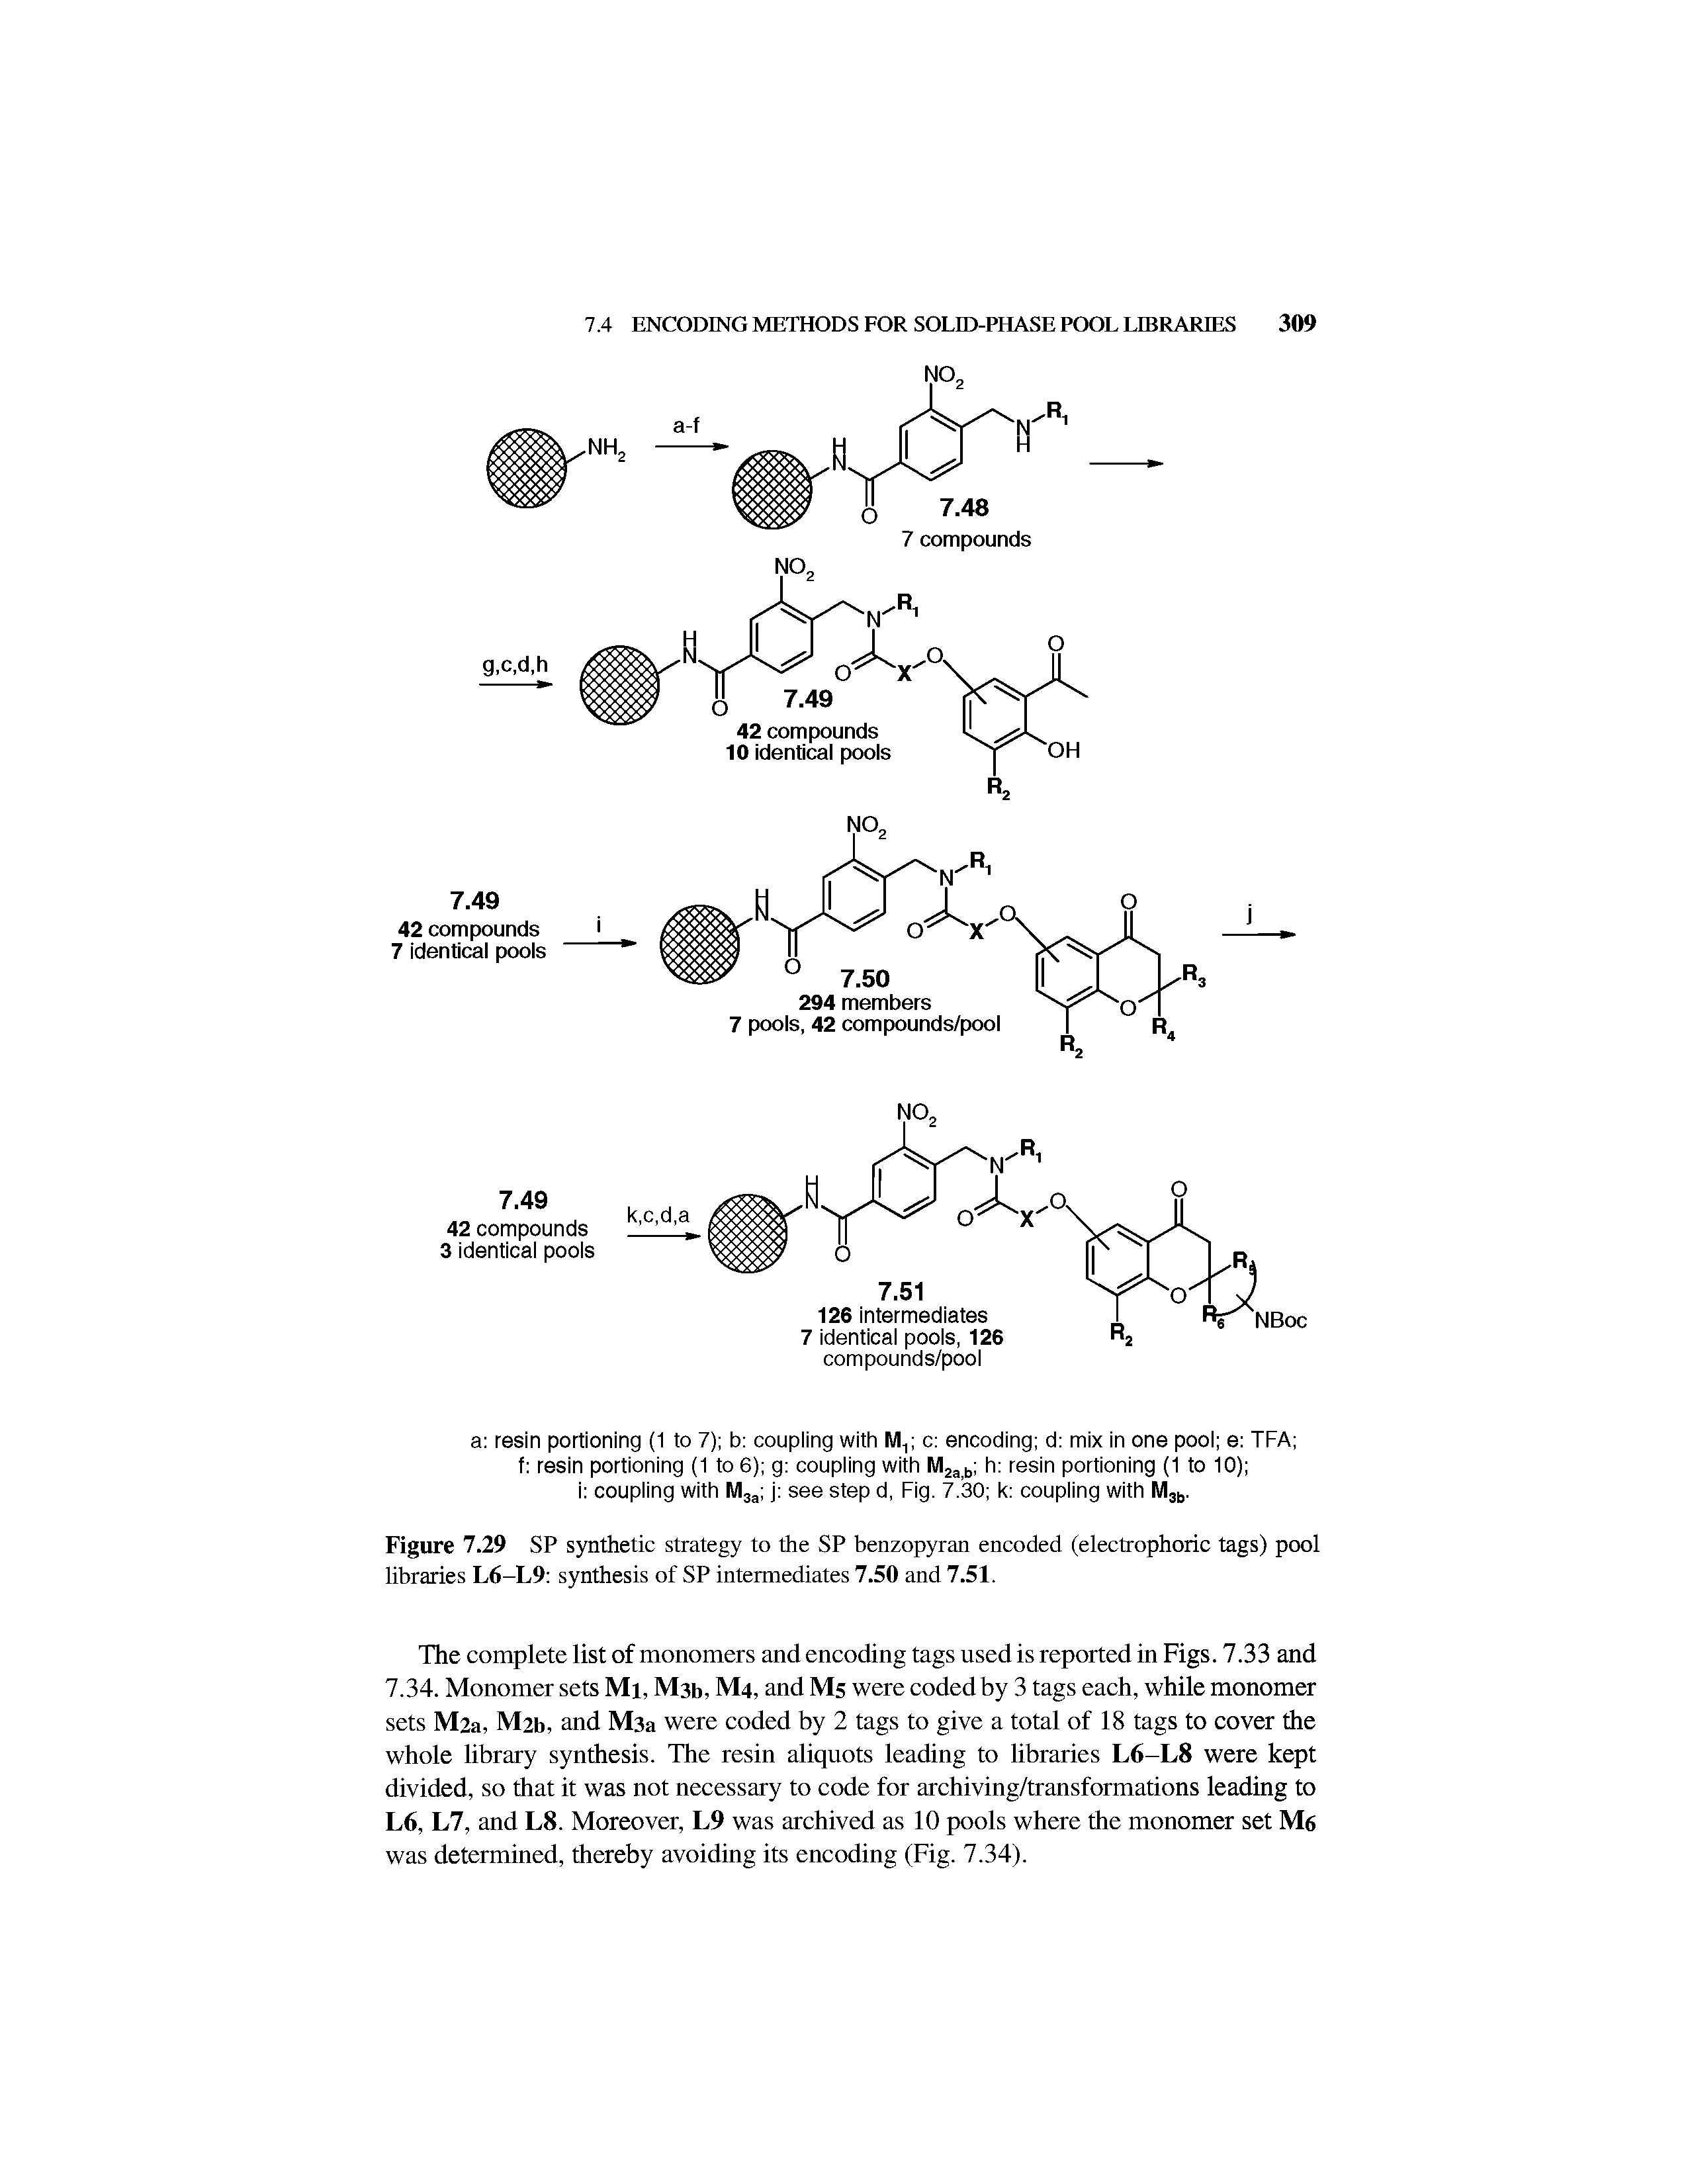 Figure 7.29 SP synthetic strategy to the SP benzopyran encoded (electrophoric tags) pool libraries L6-L9 synthesis of SP intermediates 7.50 and 7.51.